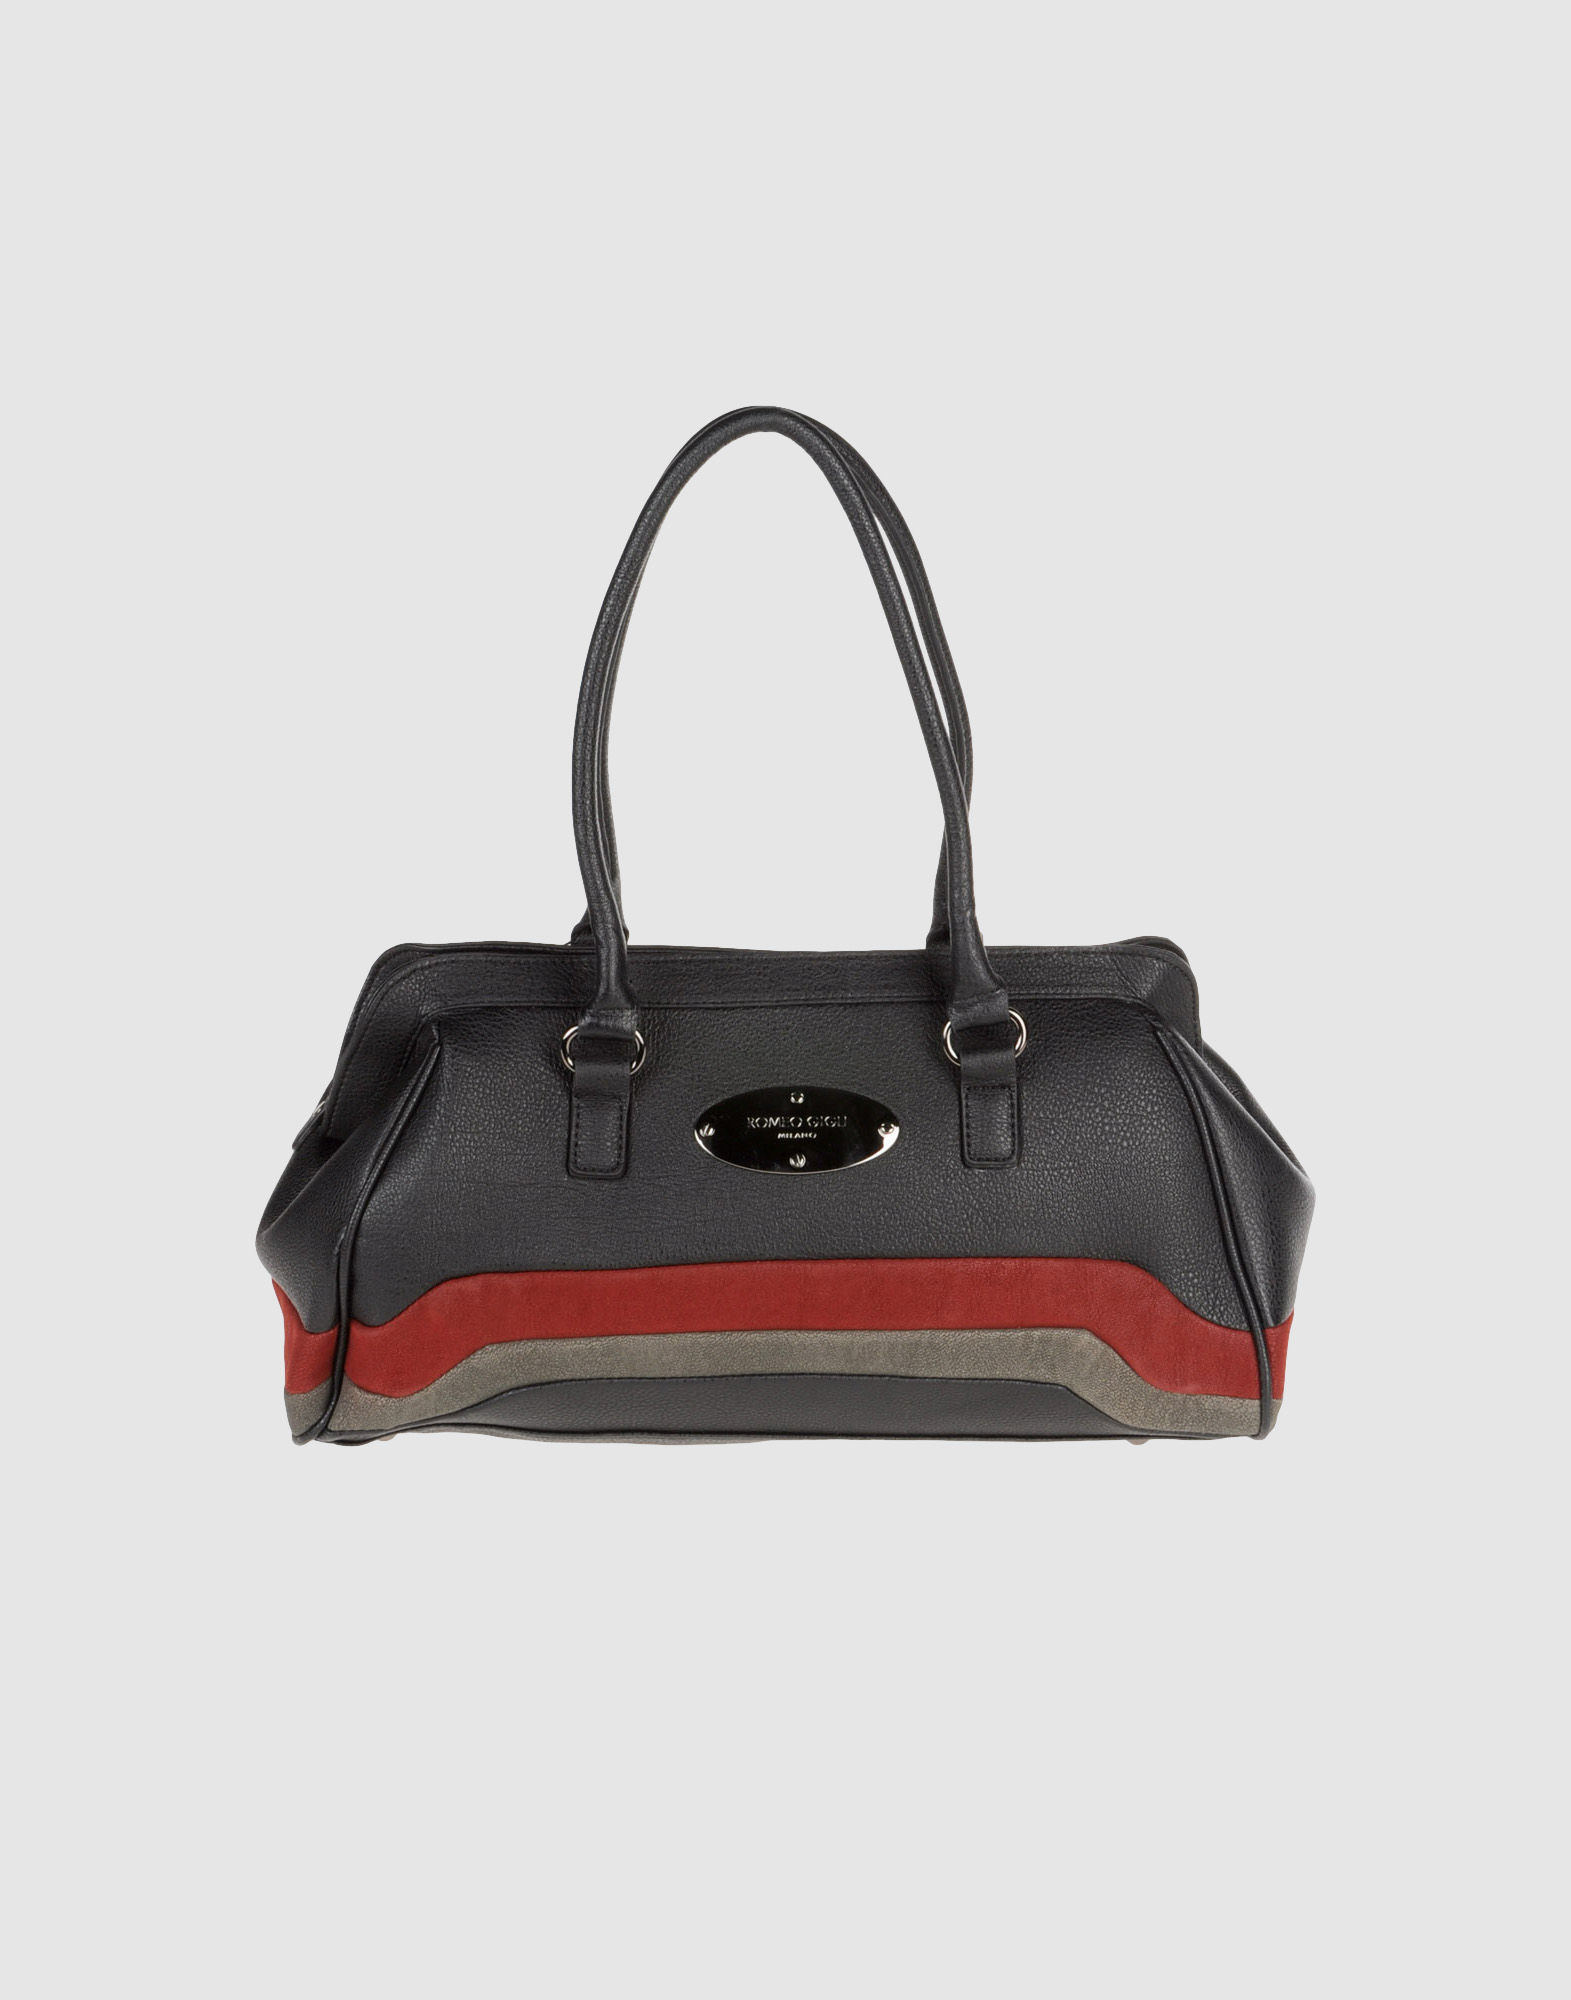 Romeo Gigli Large Leather Bags in Black | Lyst